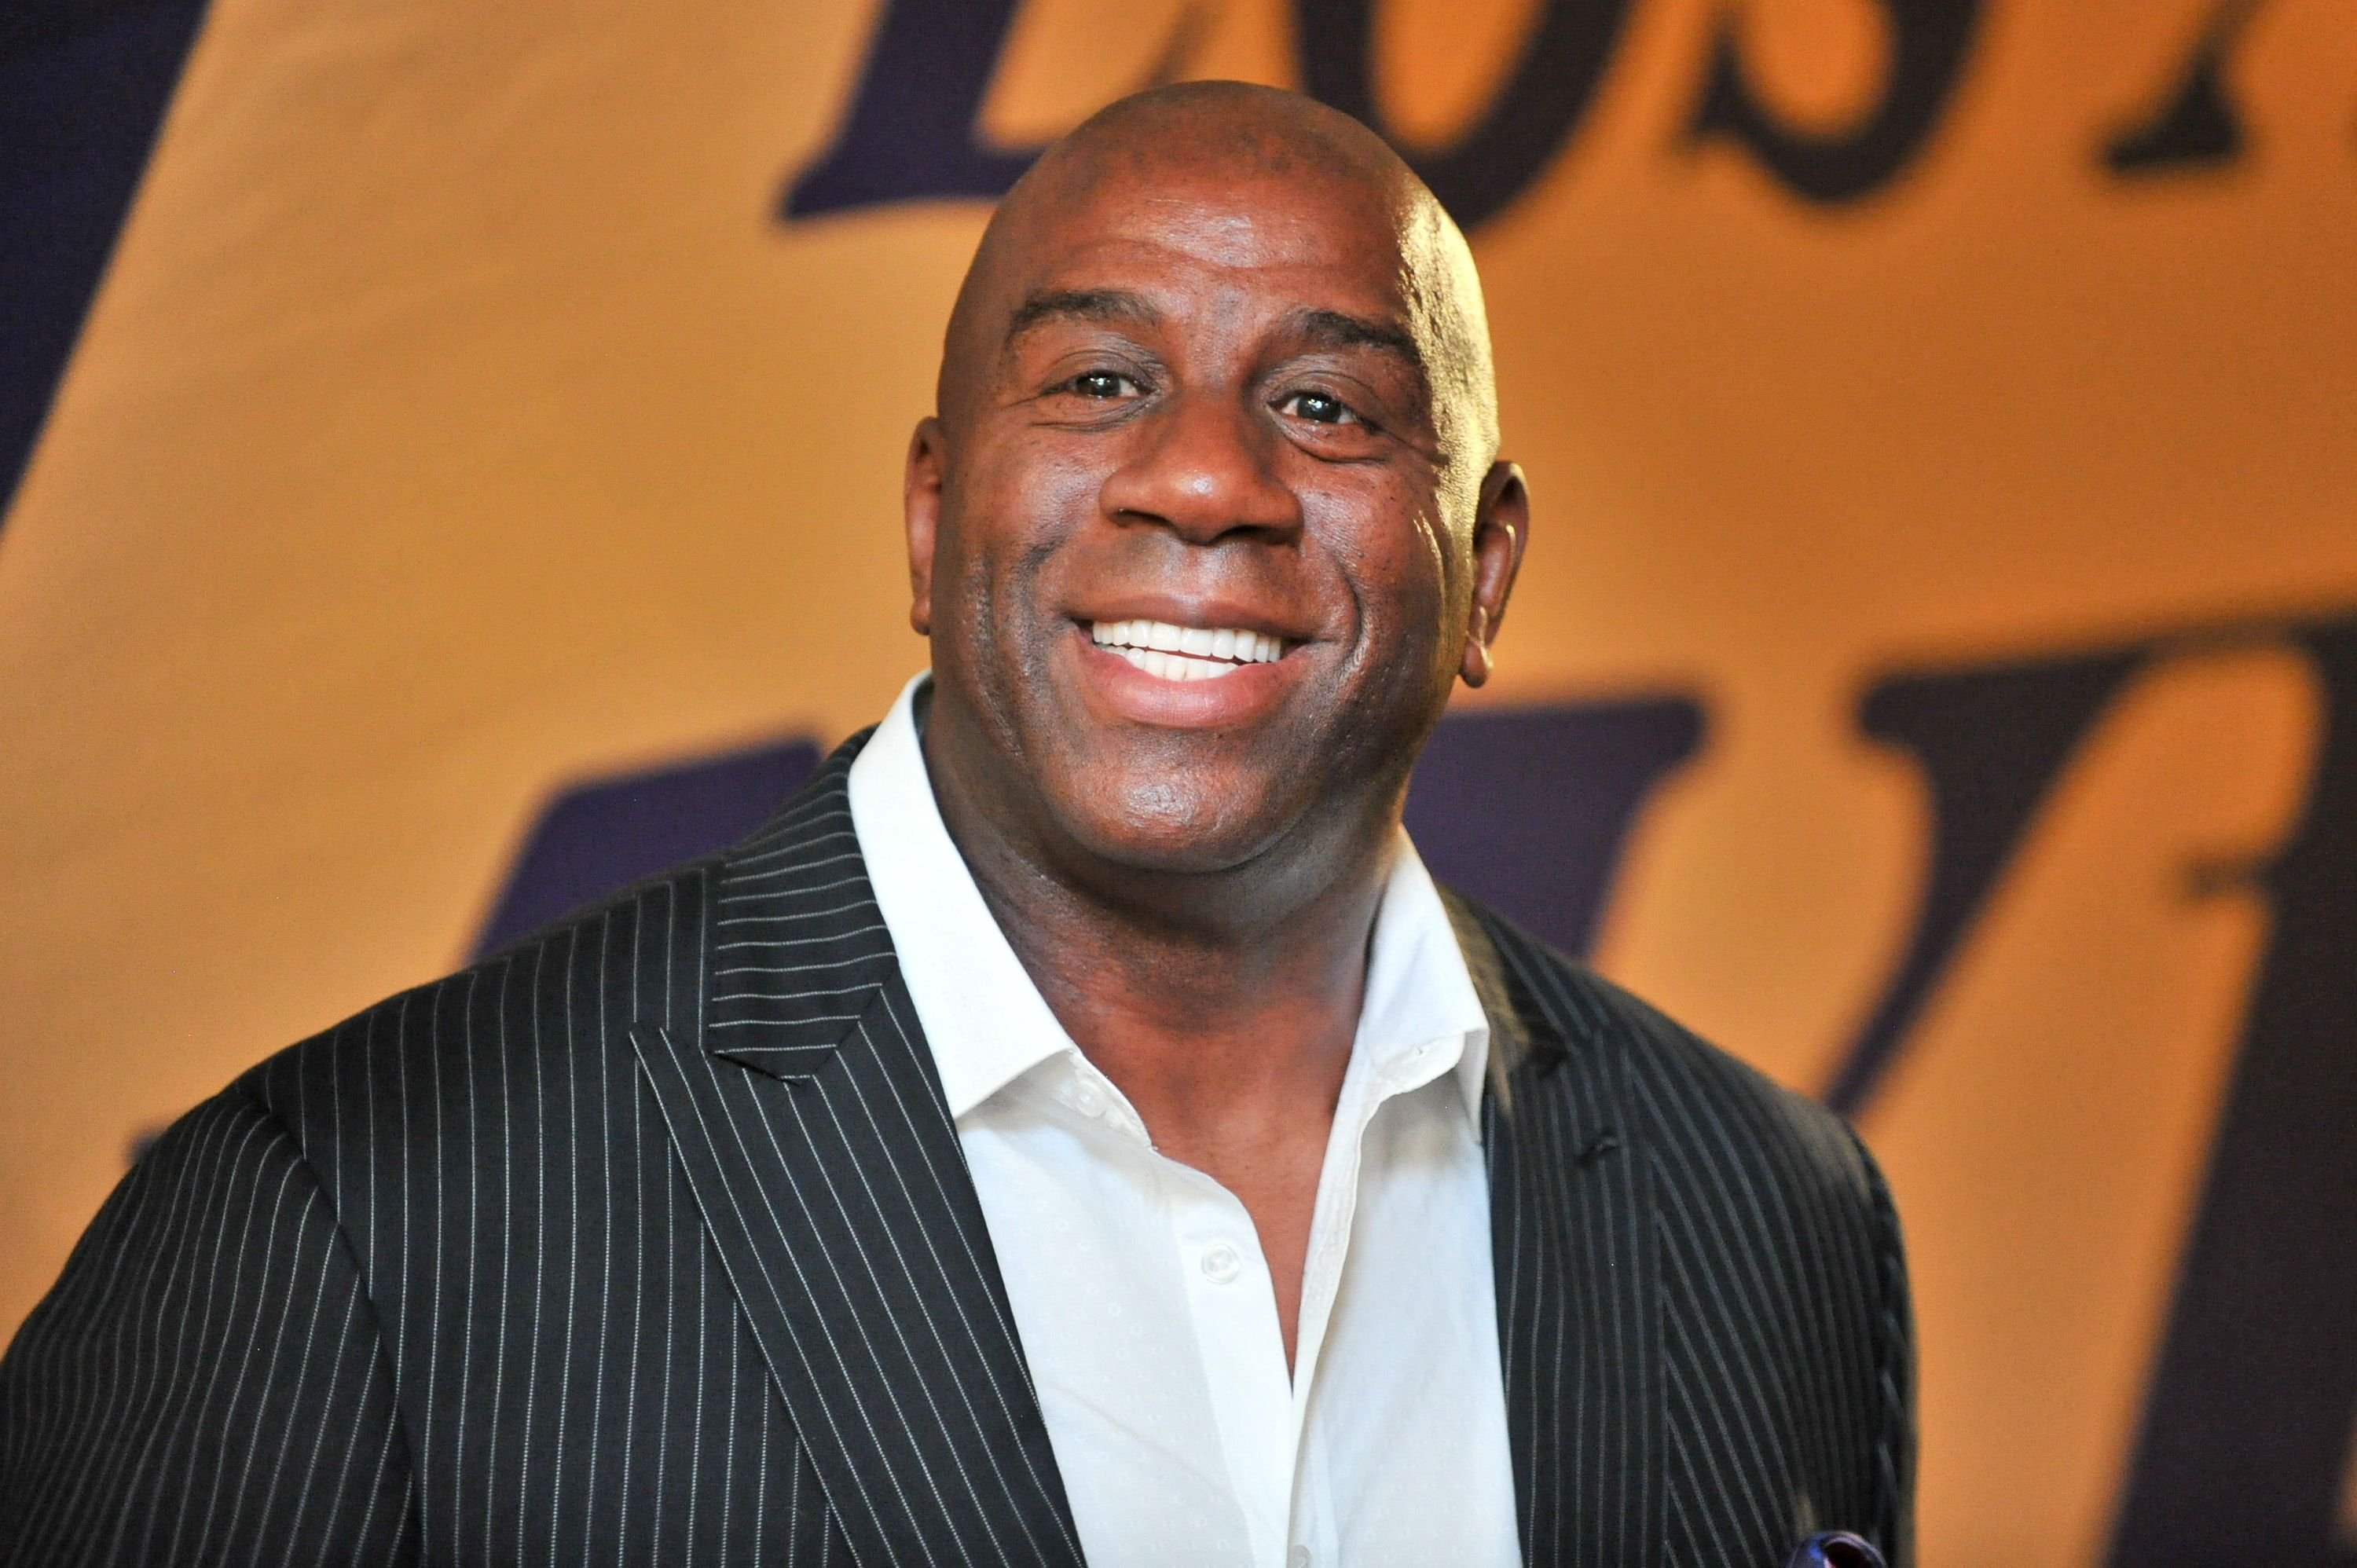 Magic Johnson at a basketball game between the Los Angeles Lakers and the Los Angeles Clippers at Staples Center on October 19, 2017 | Photo: Getty Images